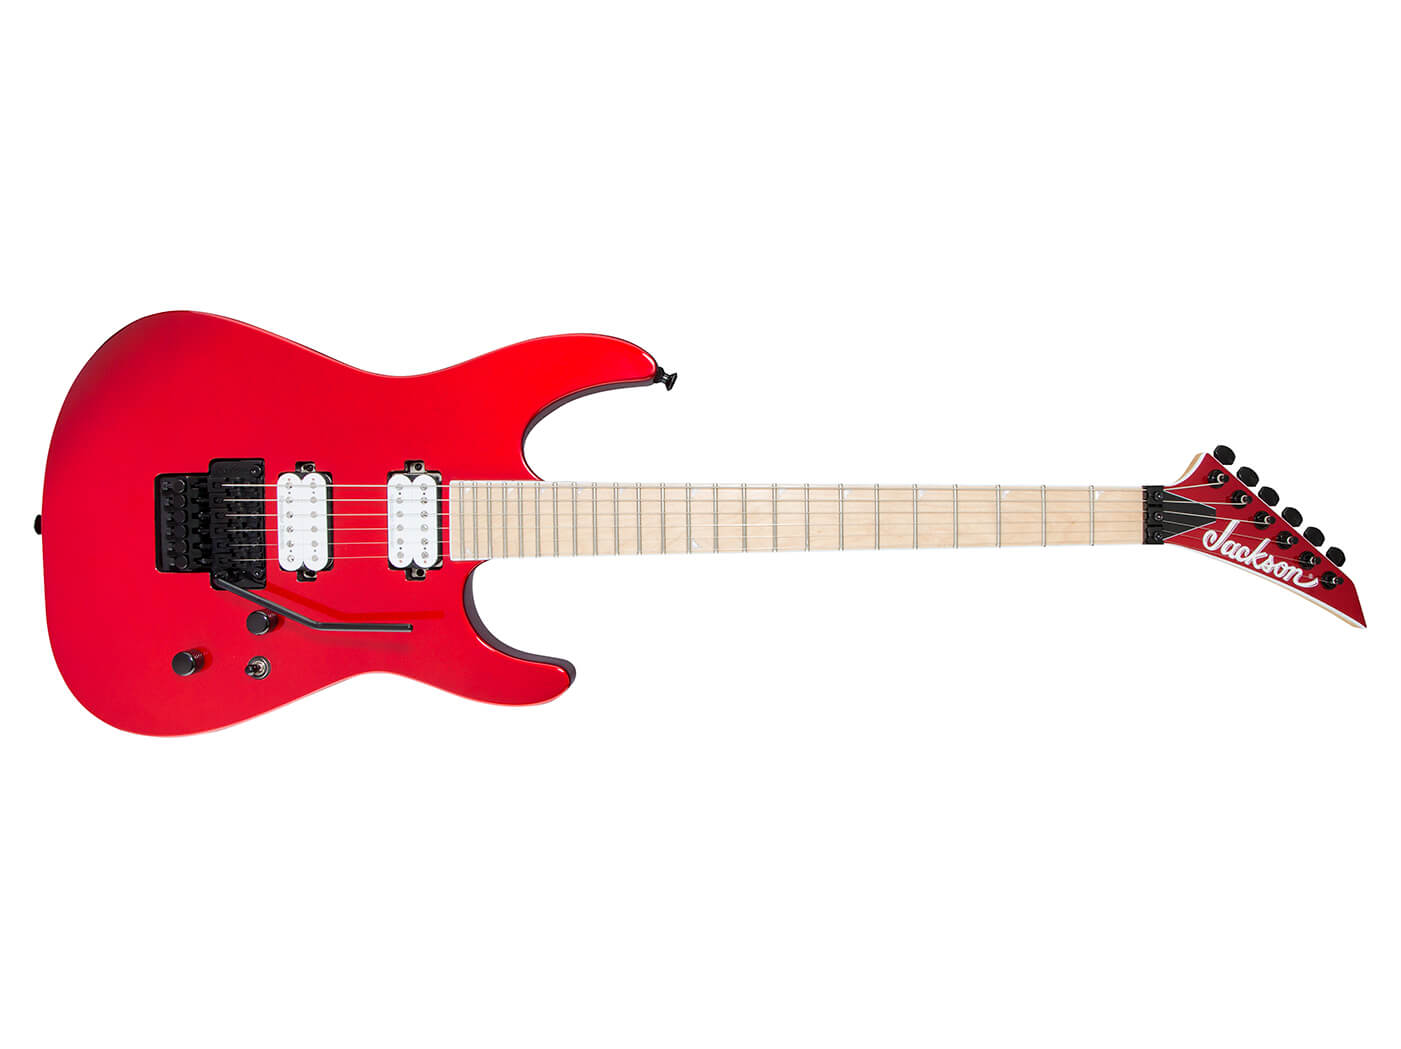 The Pro Series Soloist SL2M in Metallic Red